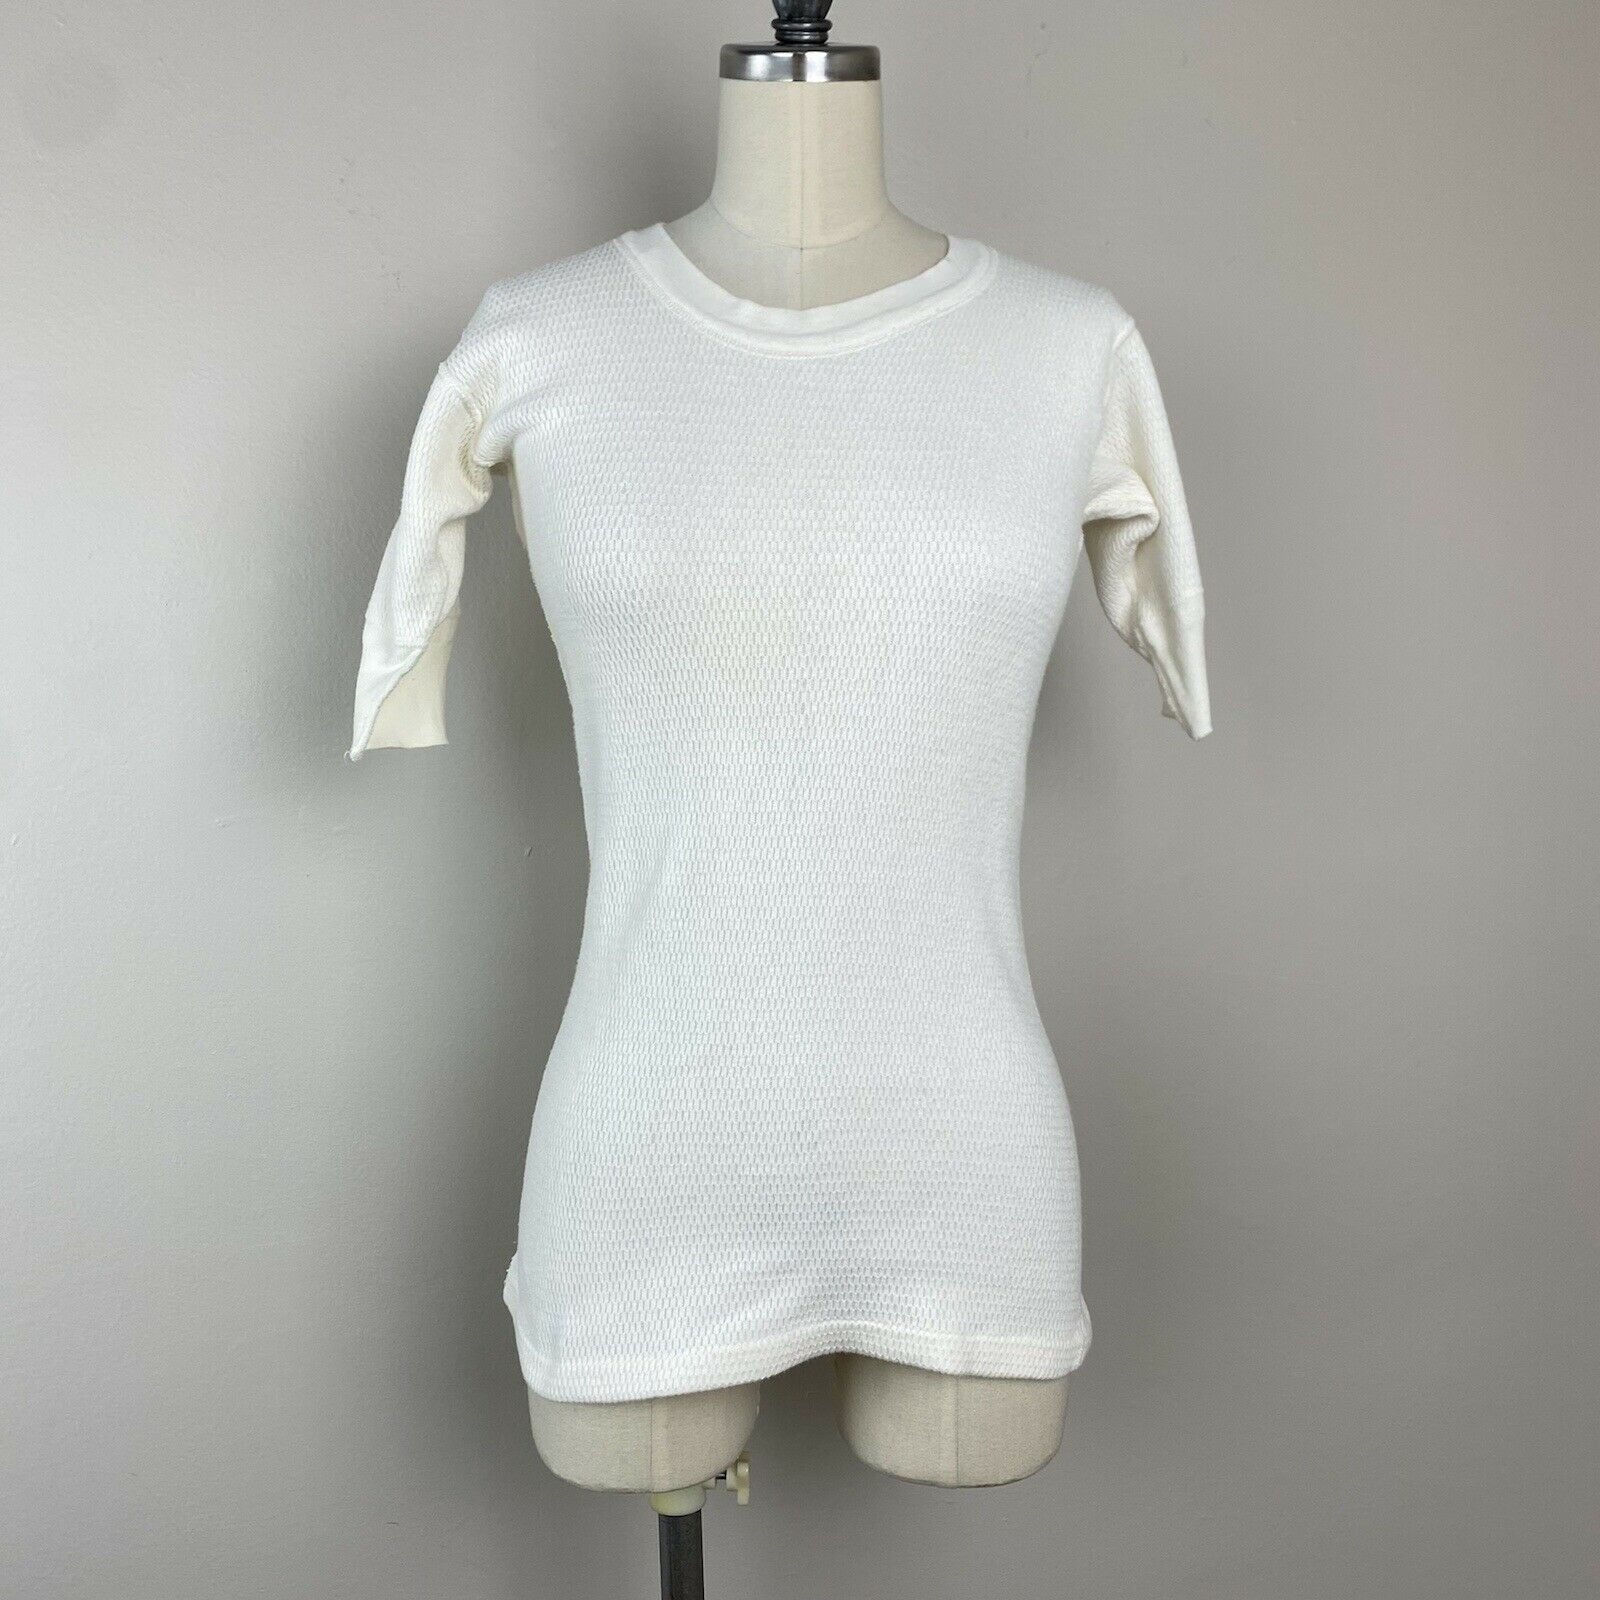 1950s Short Sleeve Thermal Shirt, Sears Roebuck & Co, Size XS/S, Long –  Proveaux Vintage